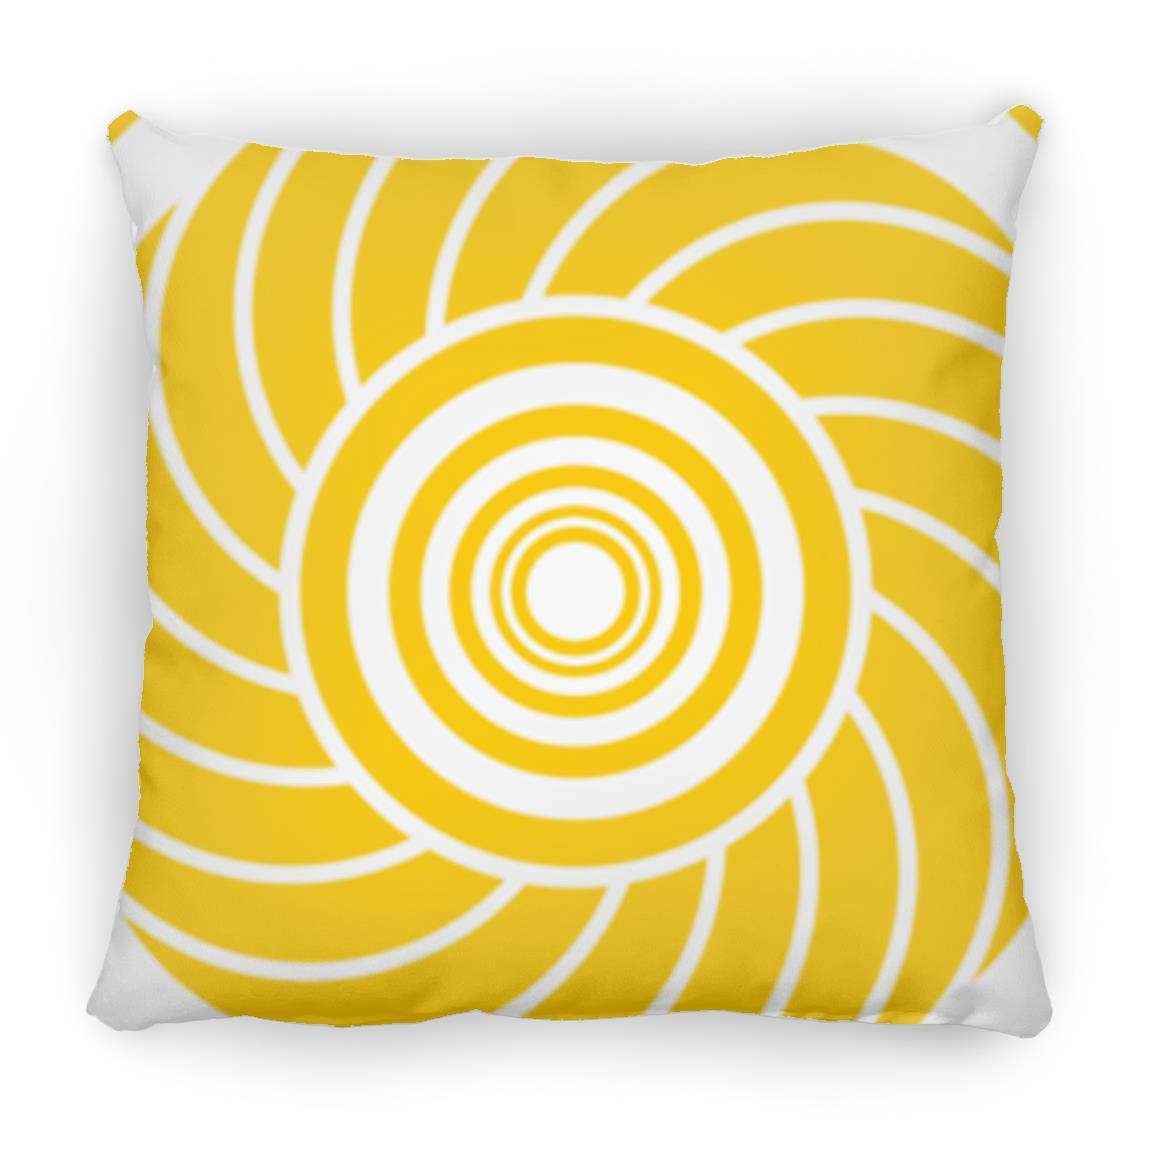 Crop Circle Pillow - Roundway Hill - Shapes of Wisdom